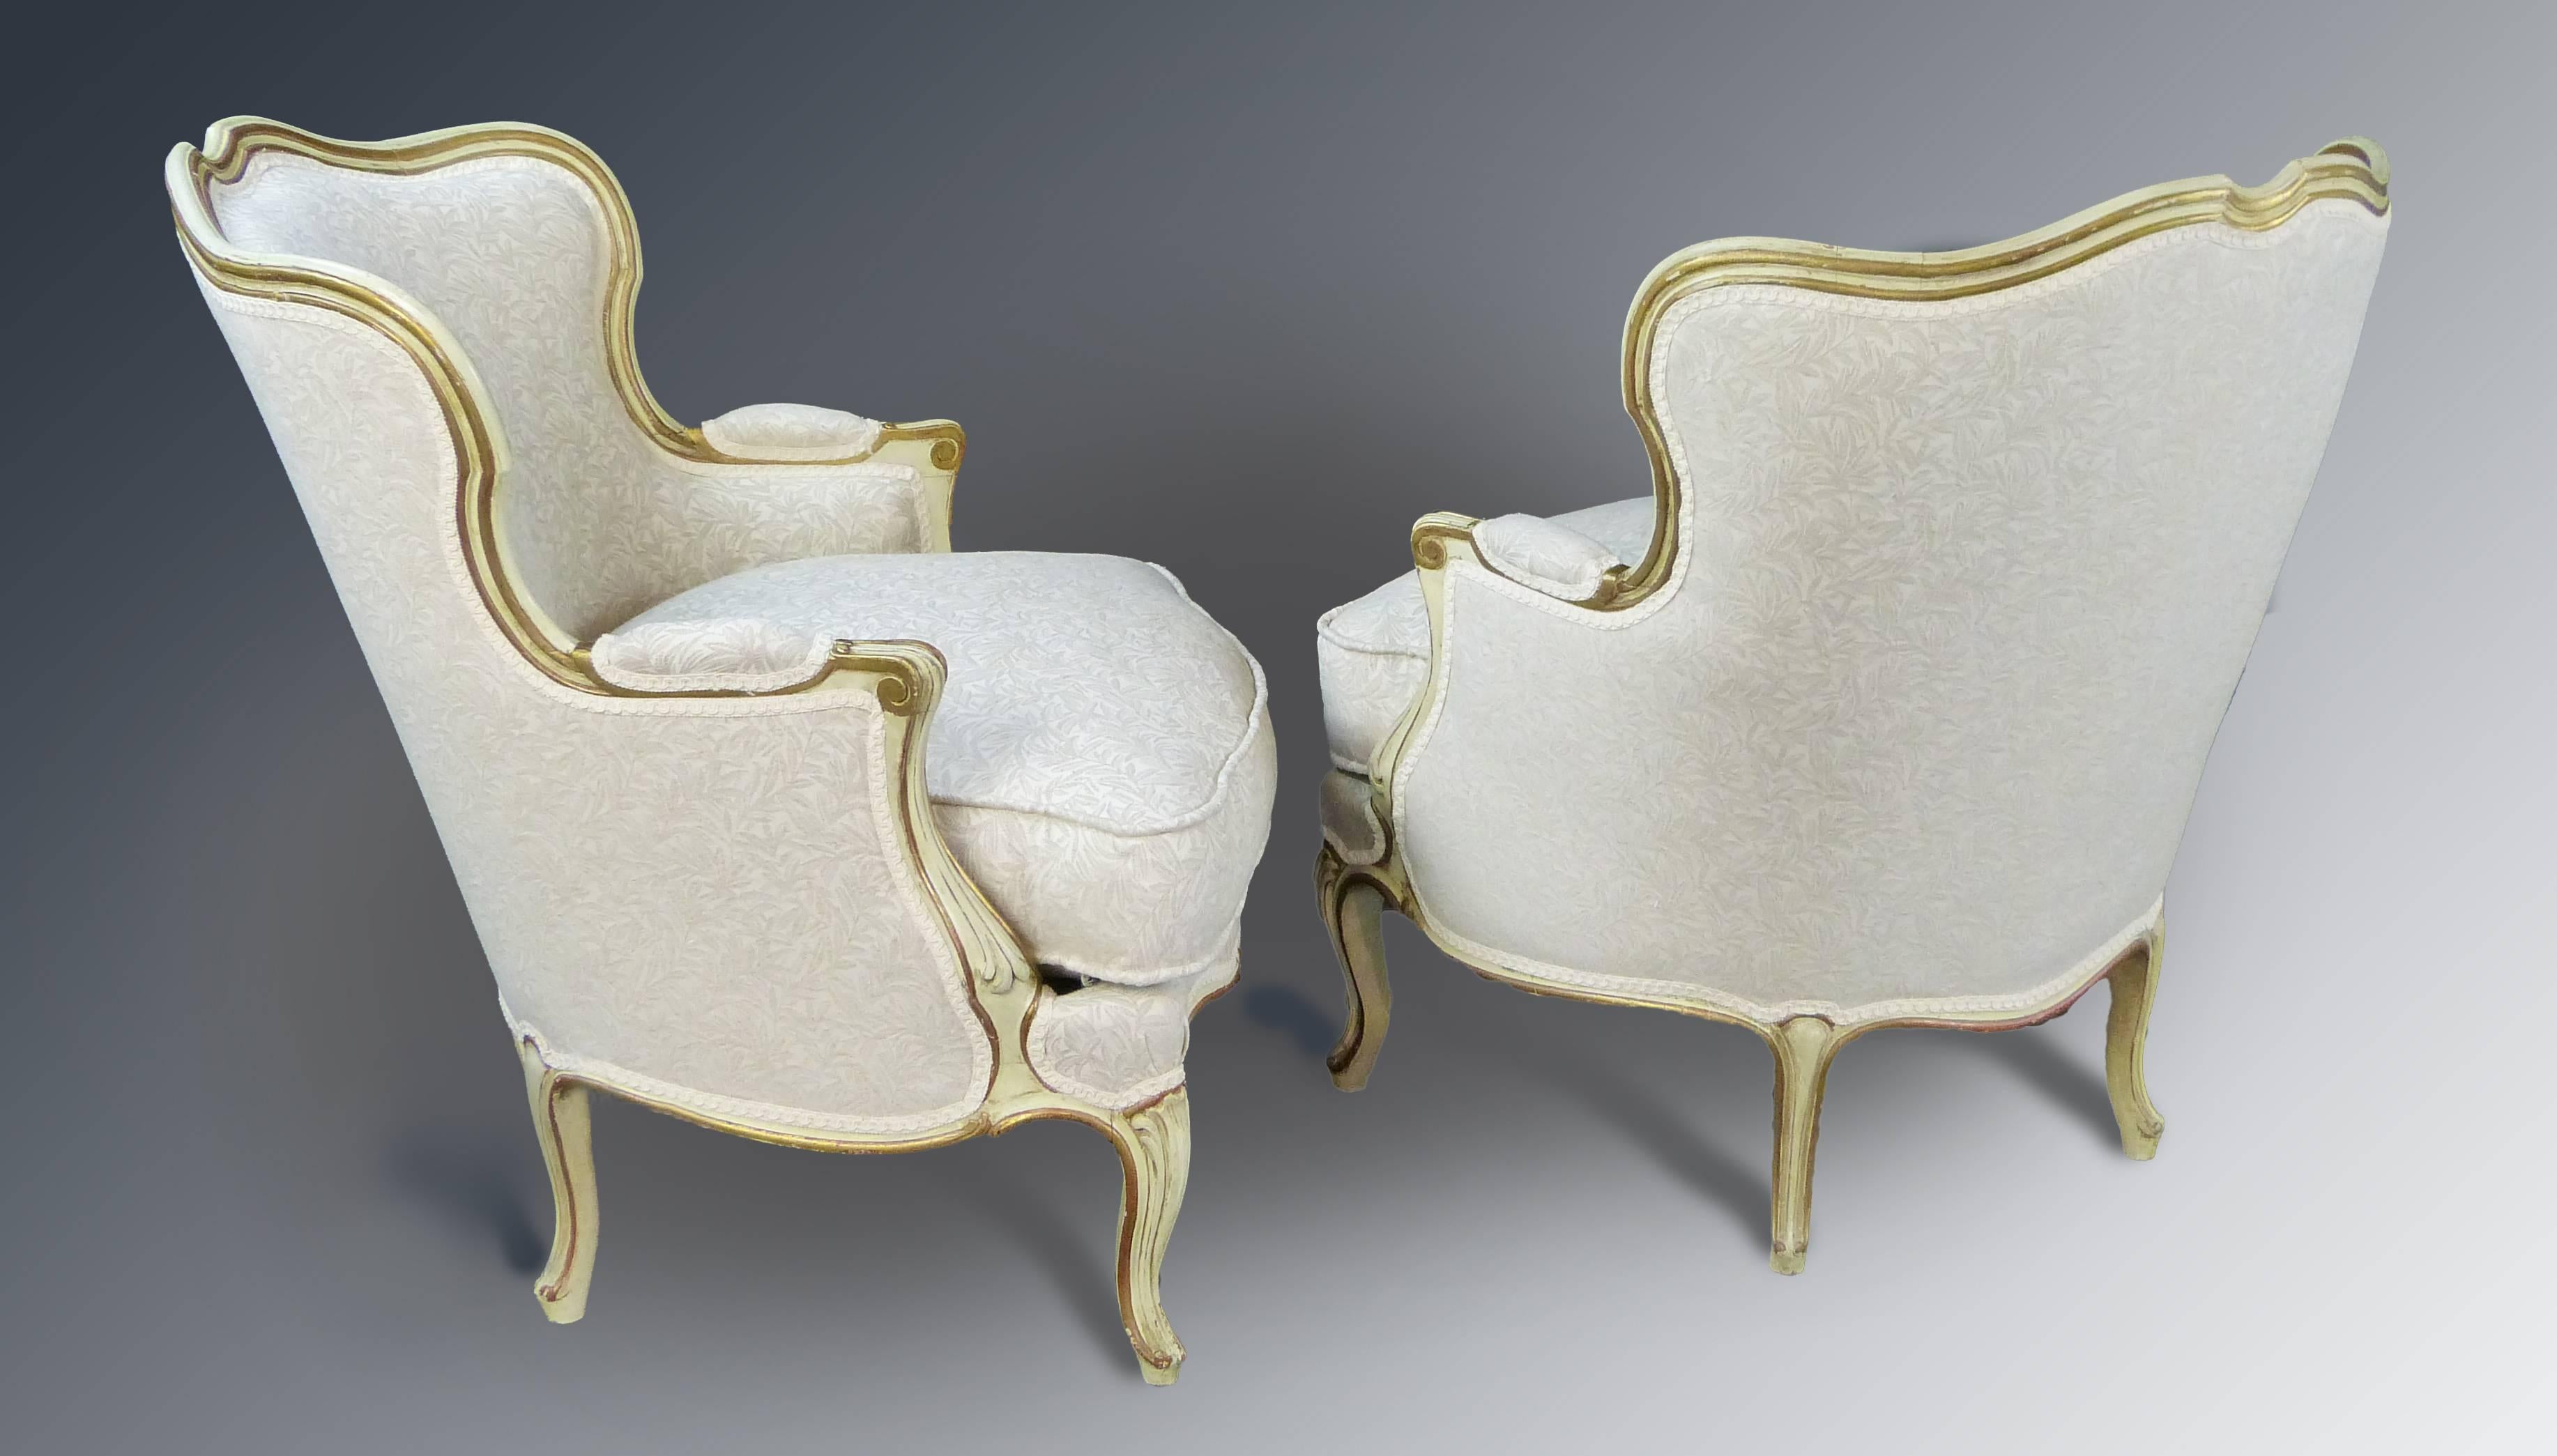 Attractive French Armchairs in the Louis XV style painted and slightly gilt having slight natural wear. Newly upholstered and in excellent condition, can be reupholstered according to customer's taste. Extremely comfortable medium sized armchairs.